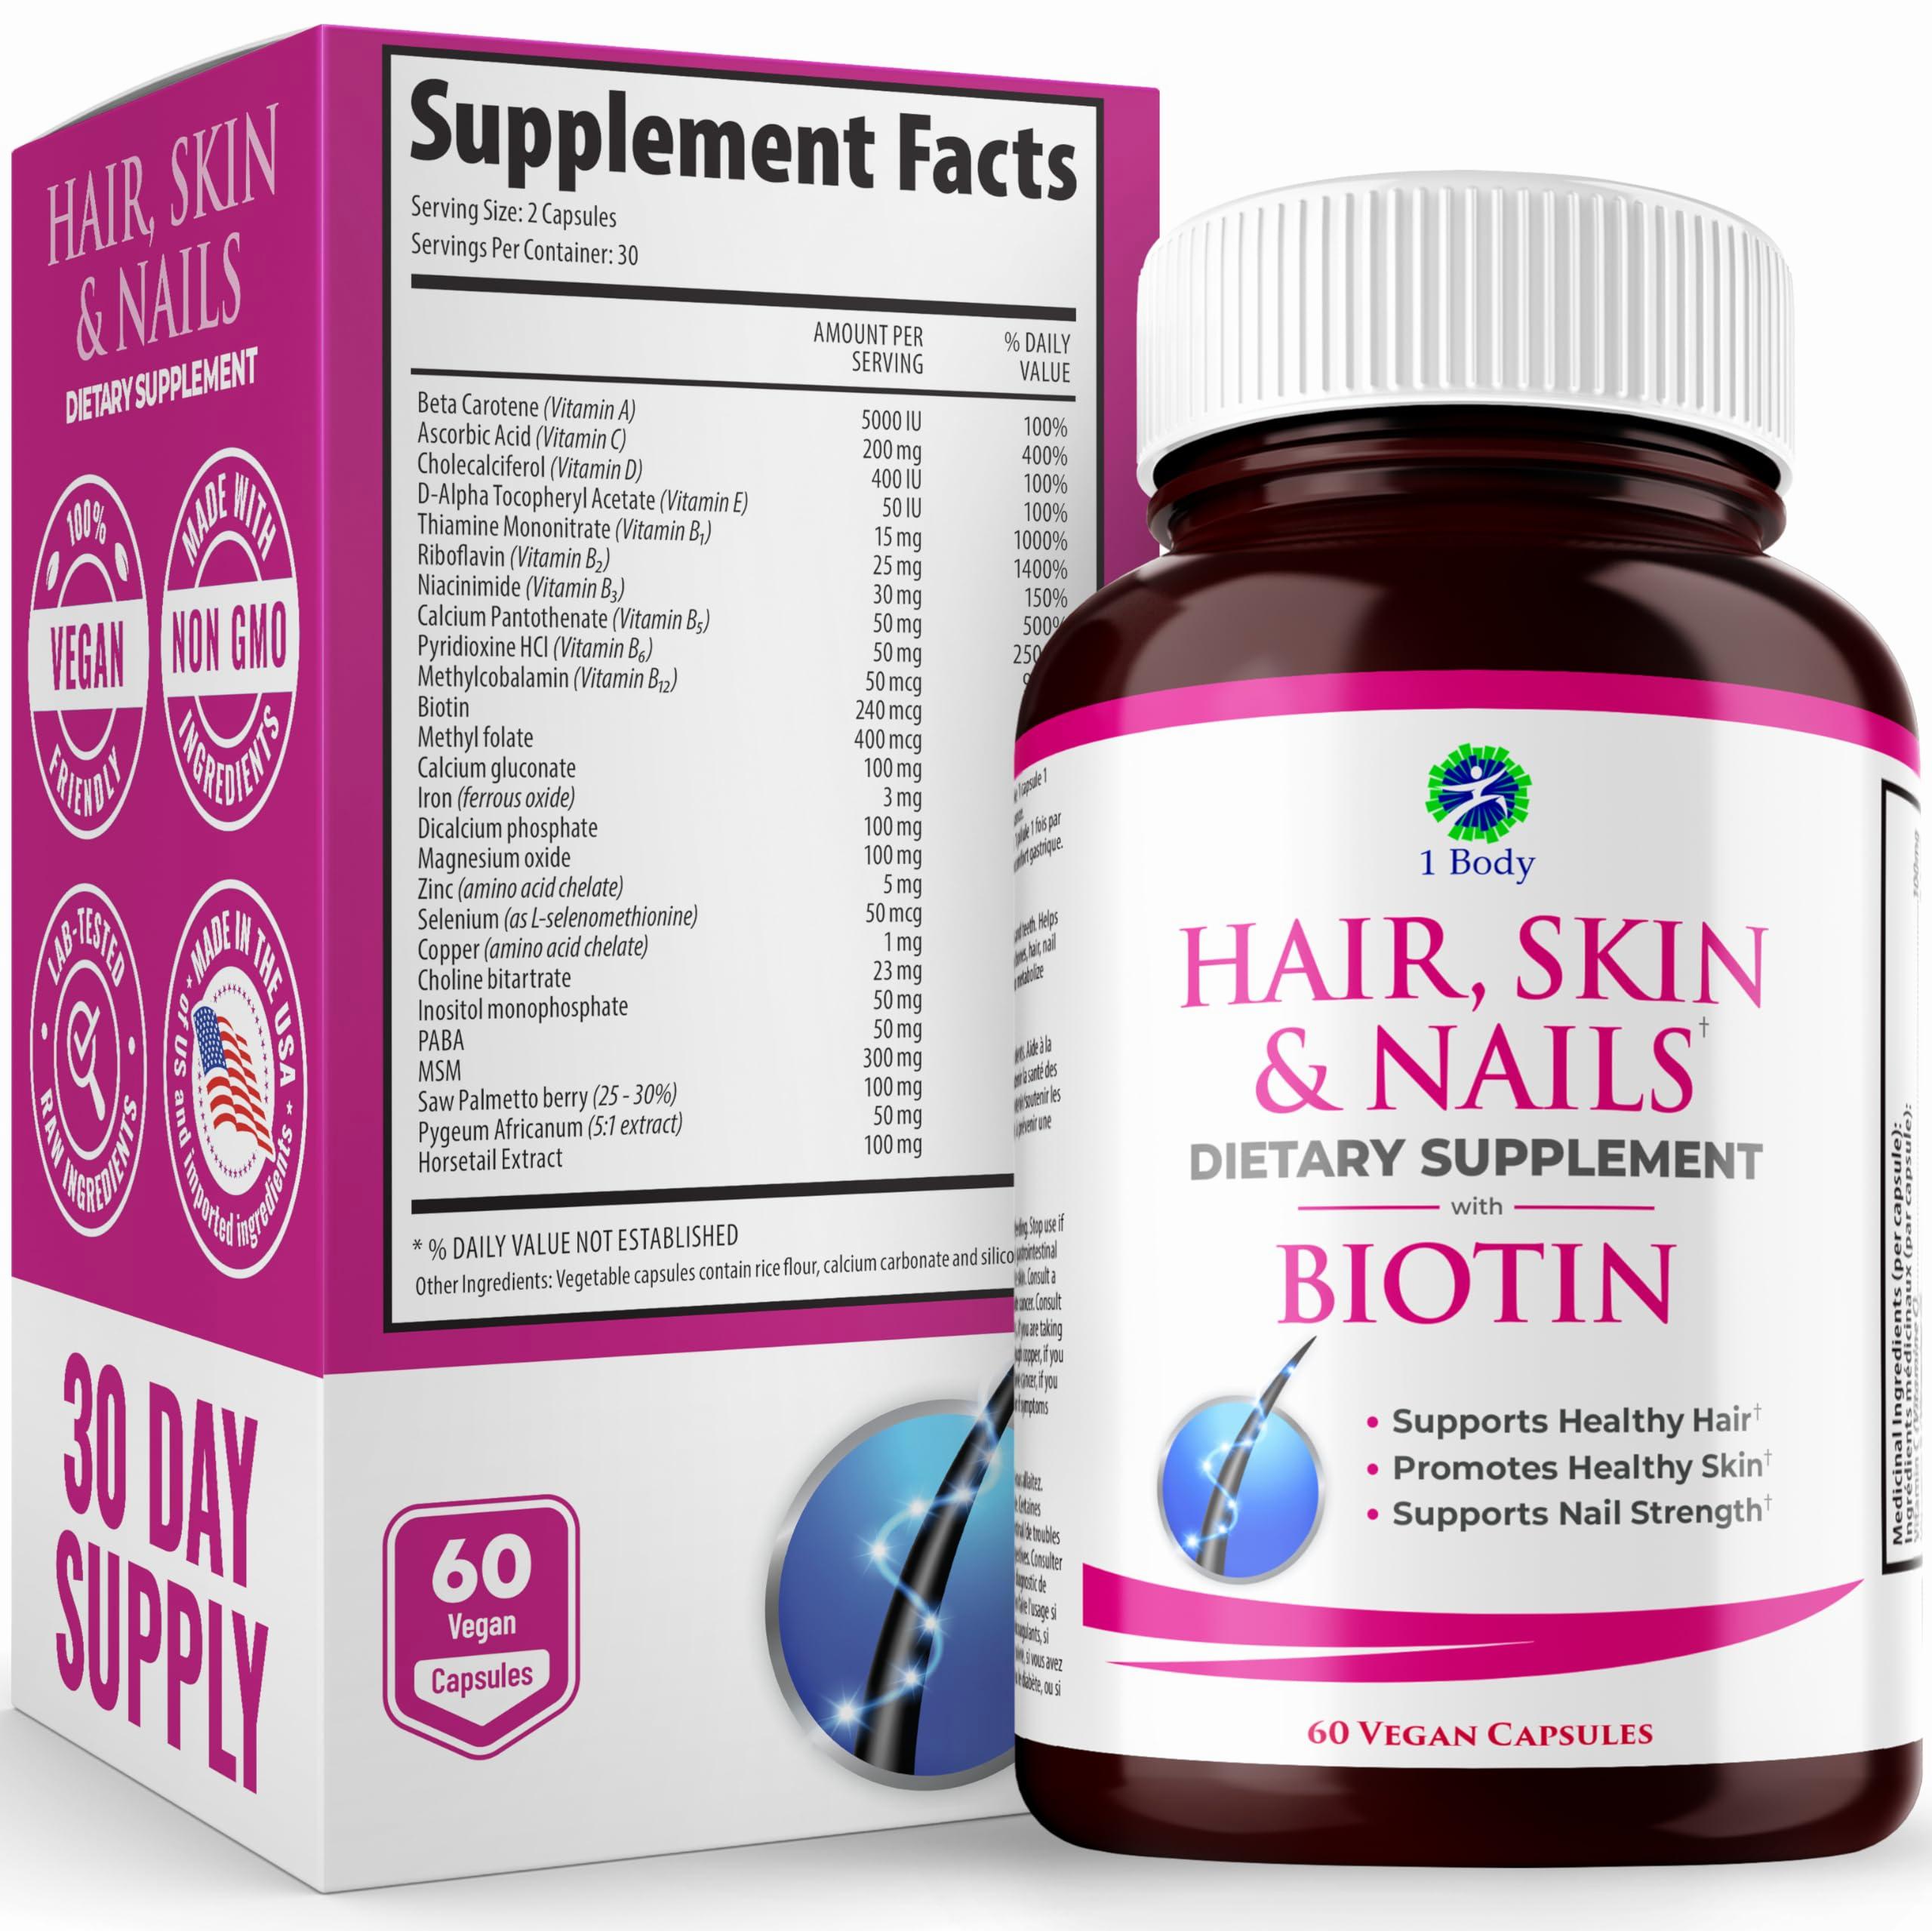 This is a bottle of hair, skin, and nails dietary supplements containing biotin.